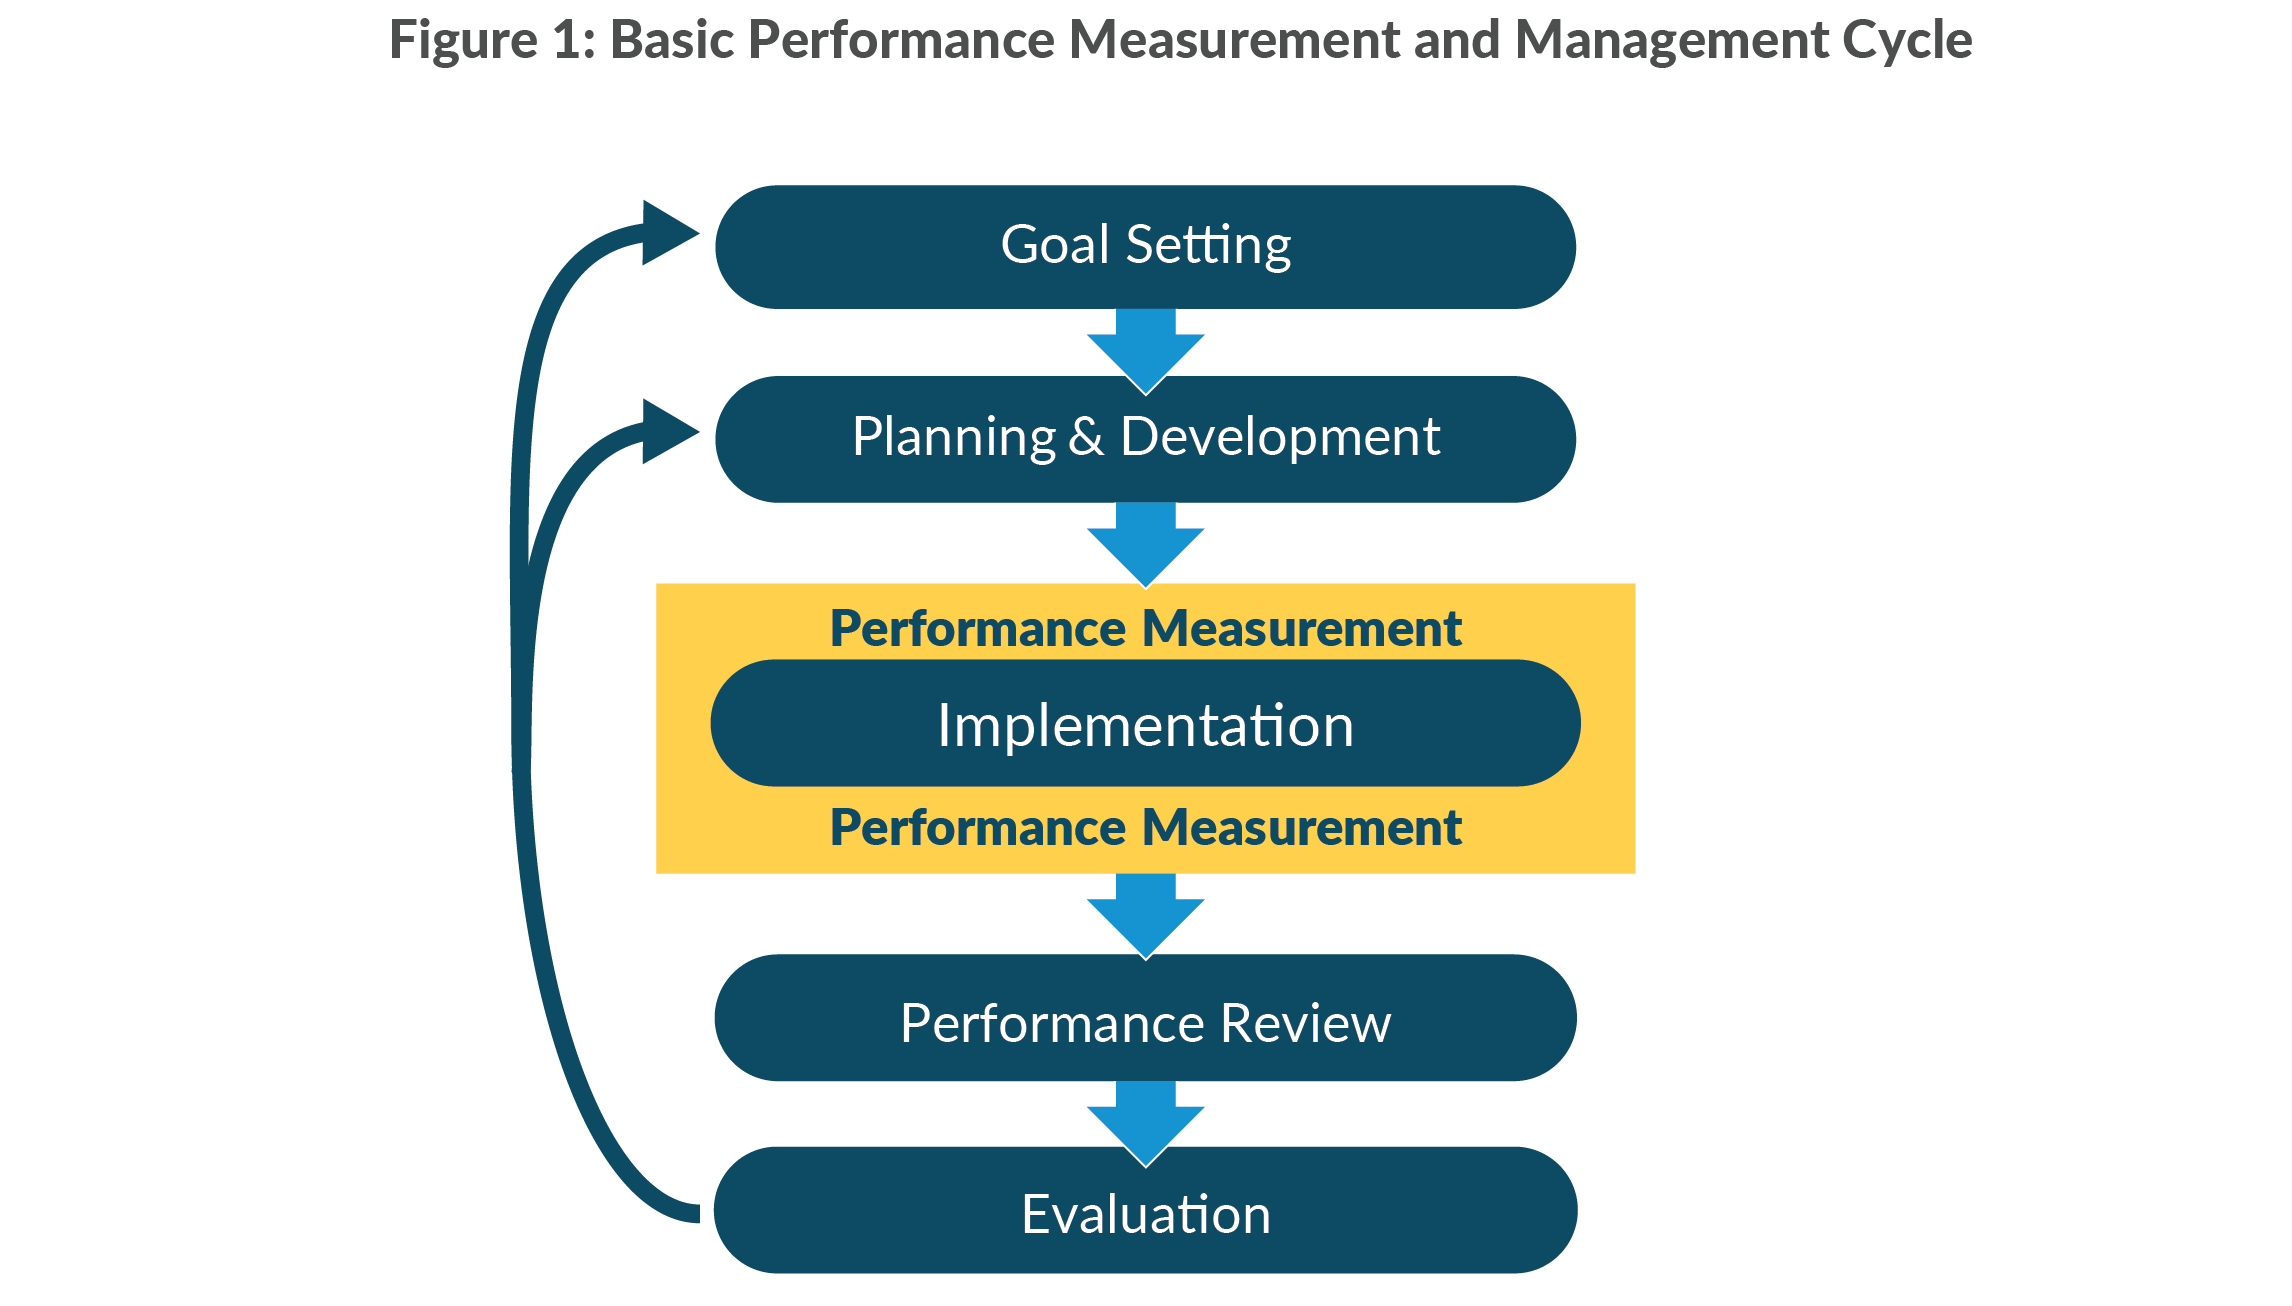 Figure 1: Basic Performance Measurement and Management Cycle